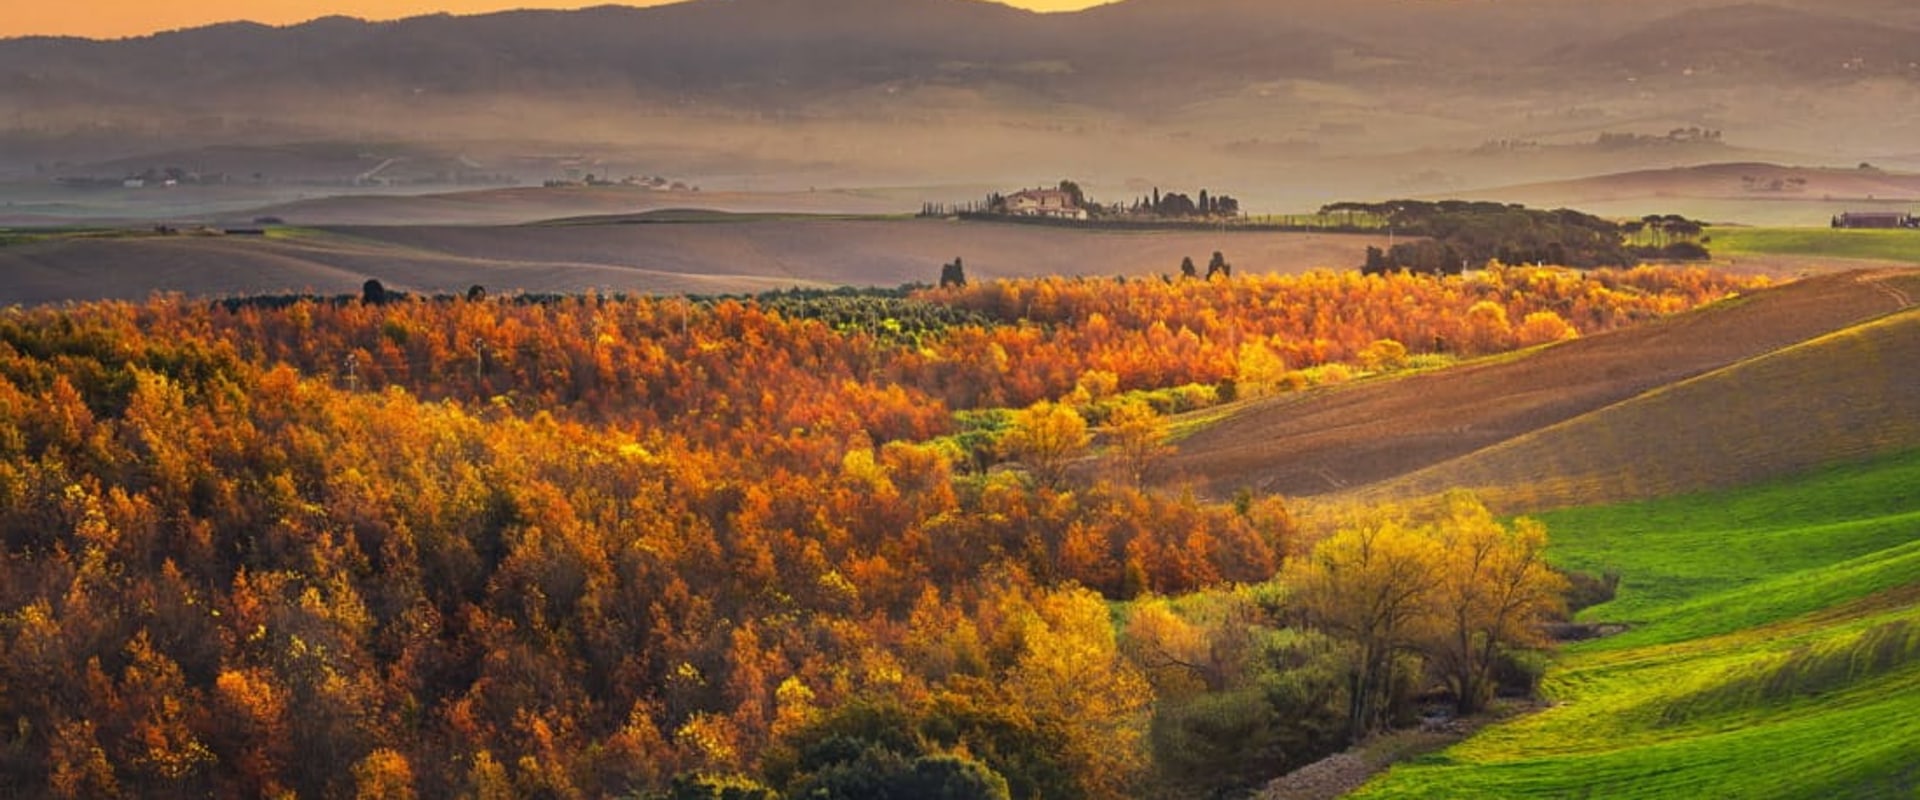 Exploring Italy in October: Where to Go and What to Do